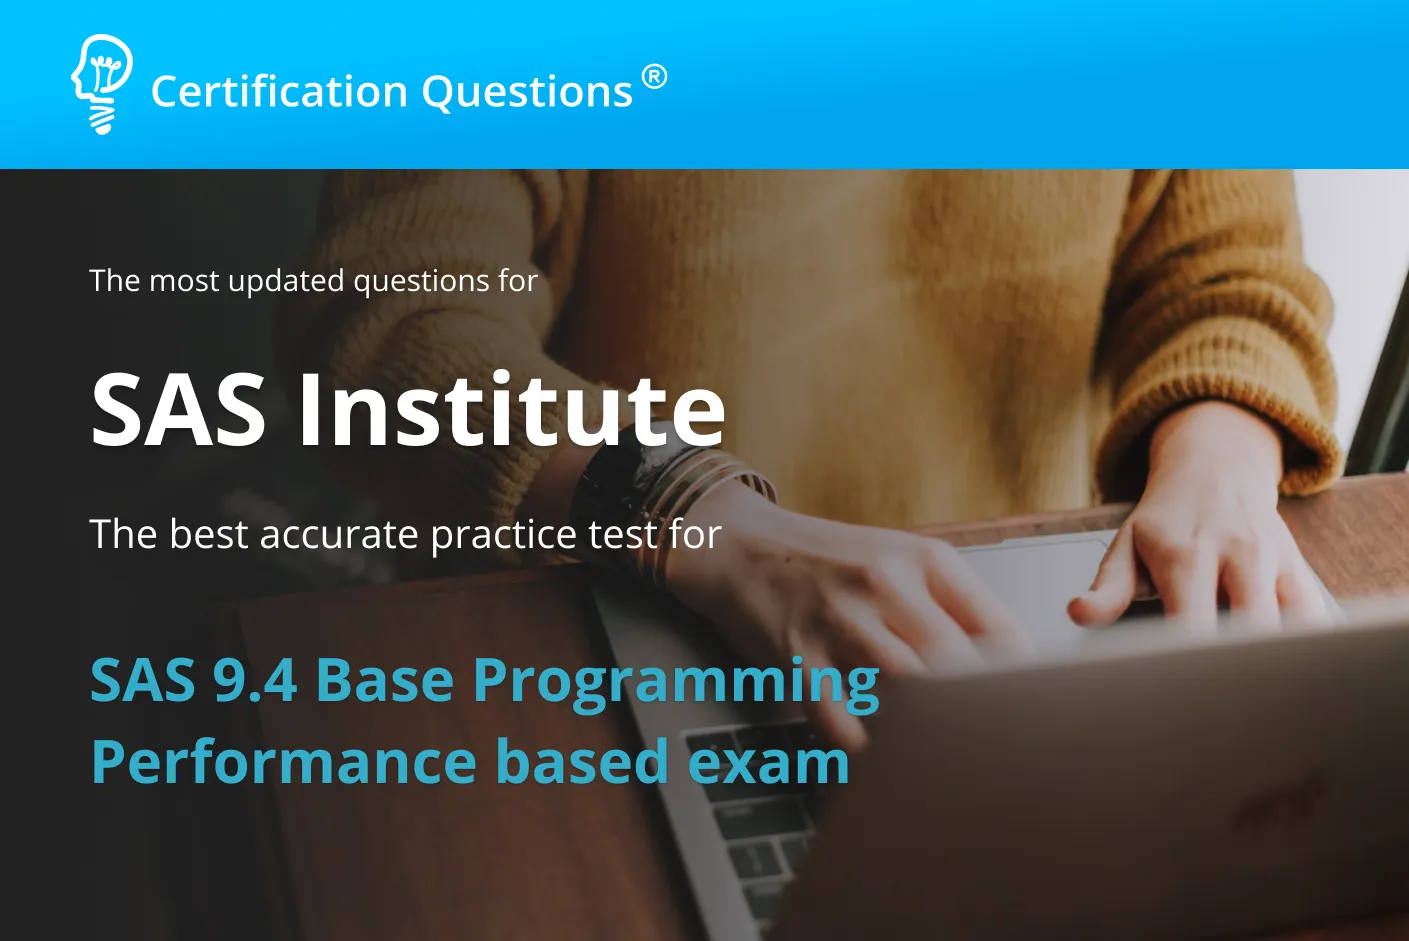 This Guide is related to a BASE SAS certification questions